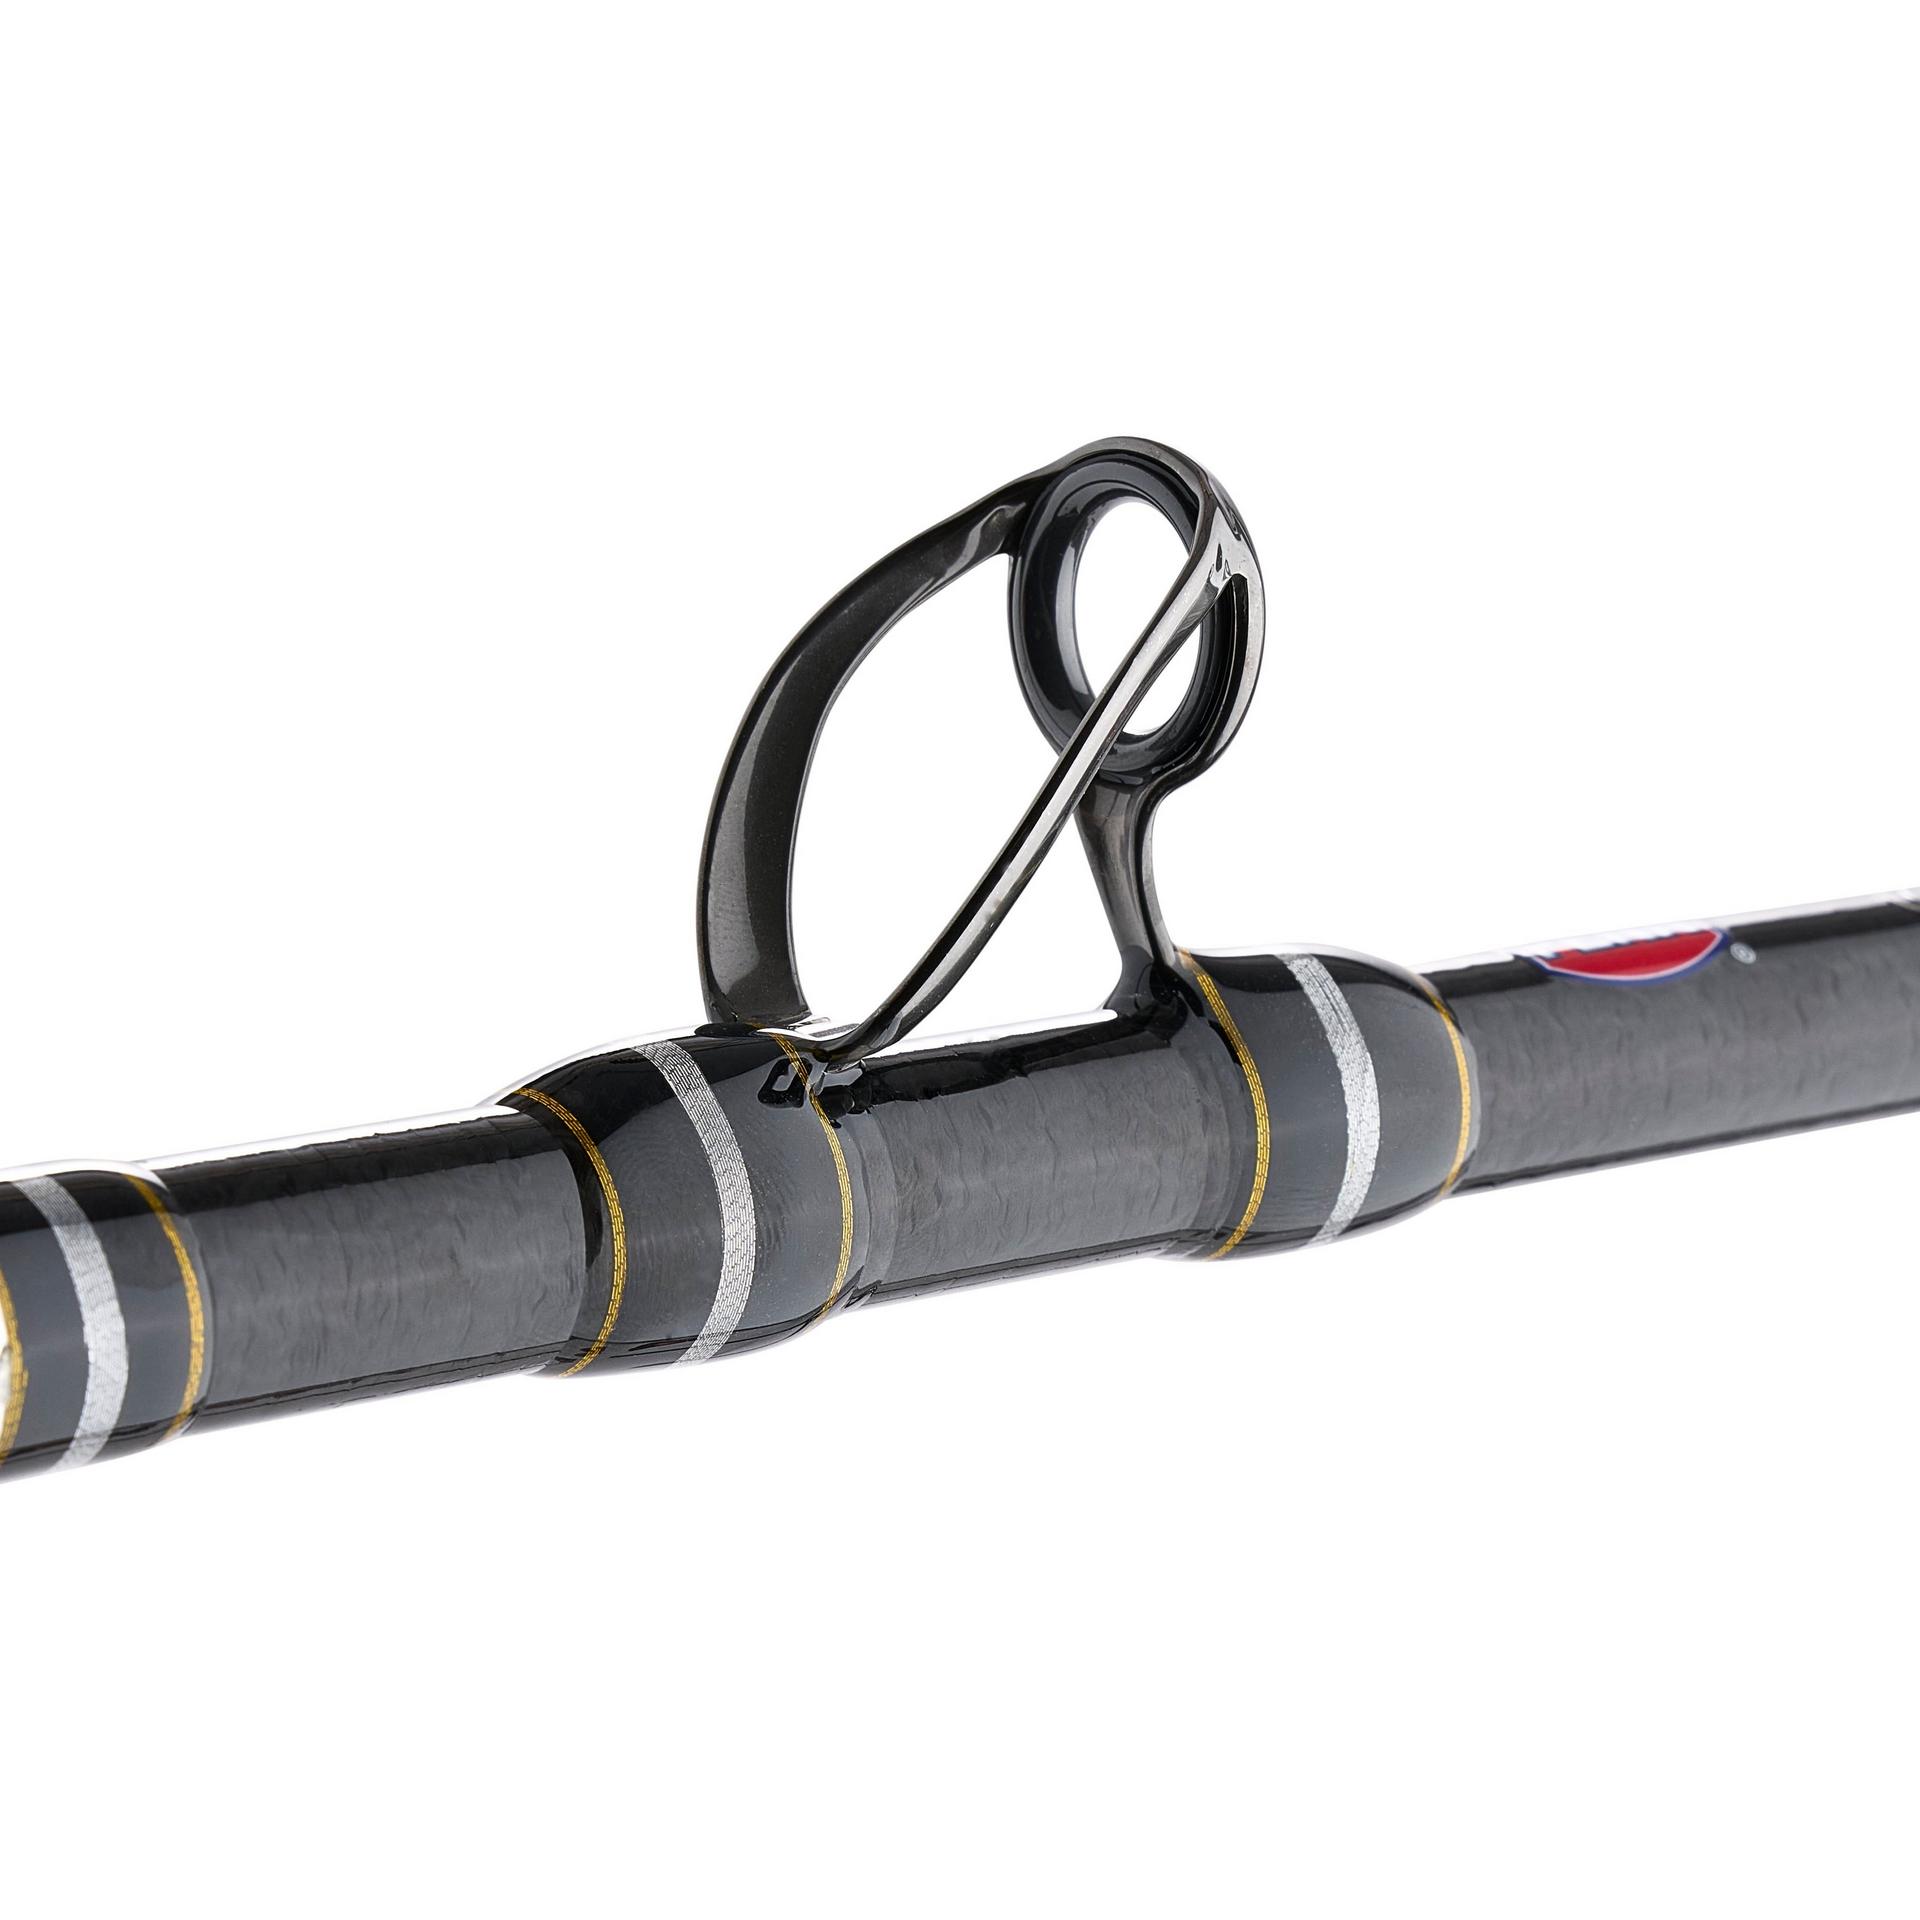 Carnage™ III Conventional Offshore Rod